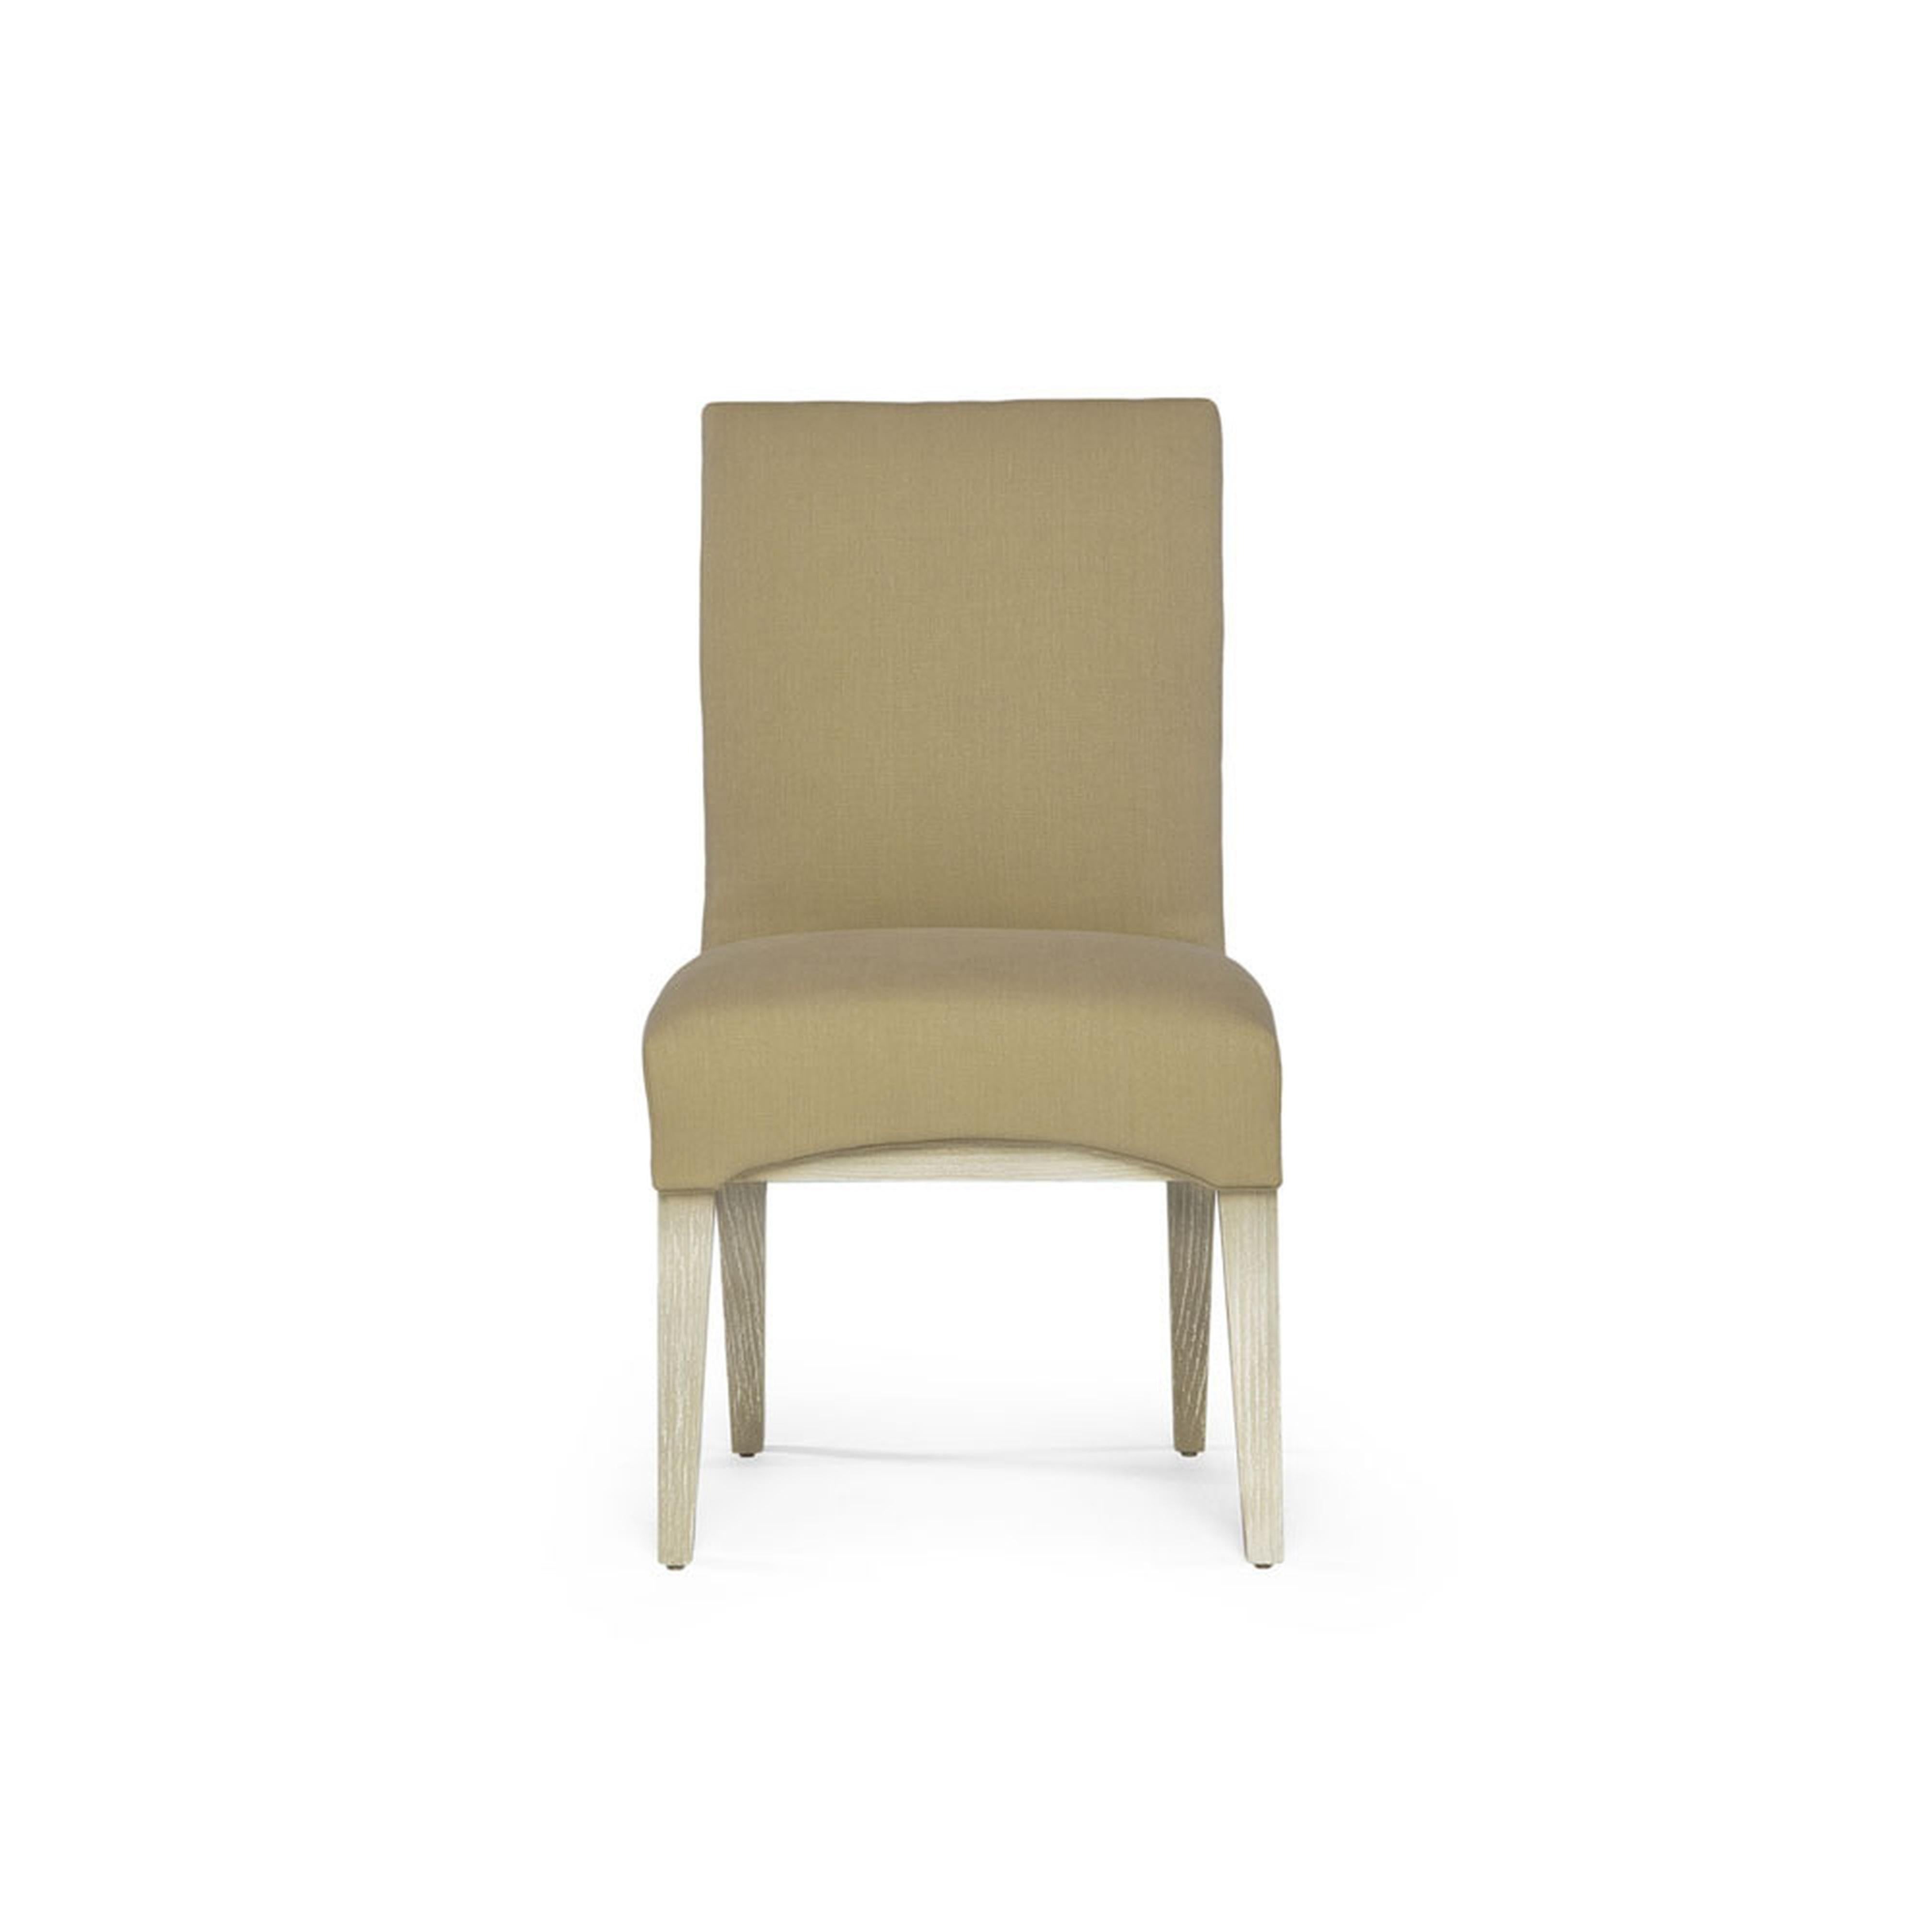 Complementary to the Capistrano dining table, the dining side chair evokes the charm of Spanish in uence of the Southern Californian 1900s. The chair is newly upholstered in the front, with a cushioned seat. The back of the chair features a